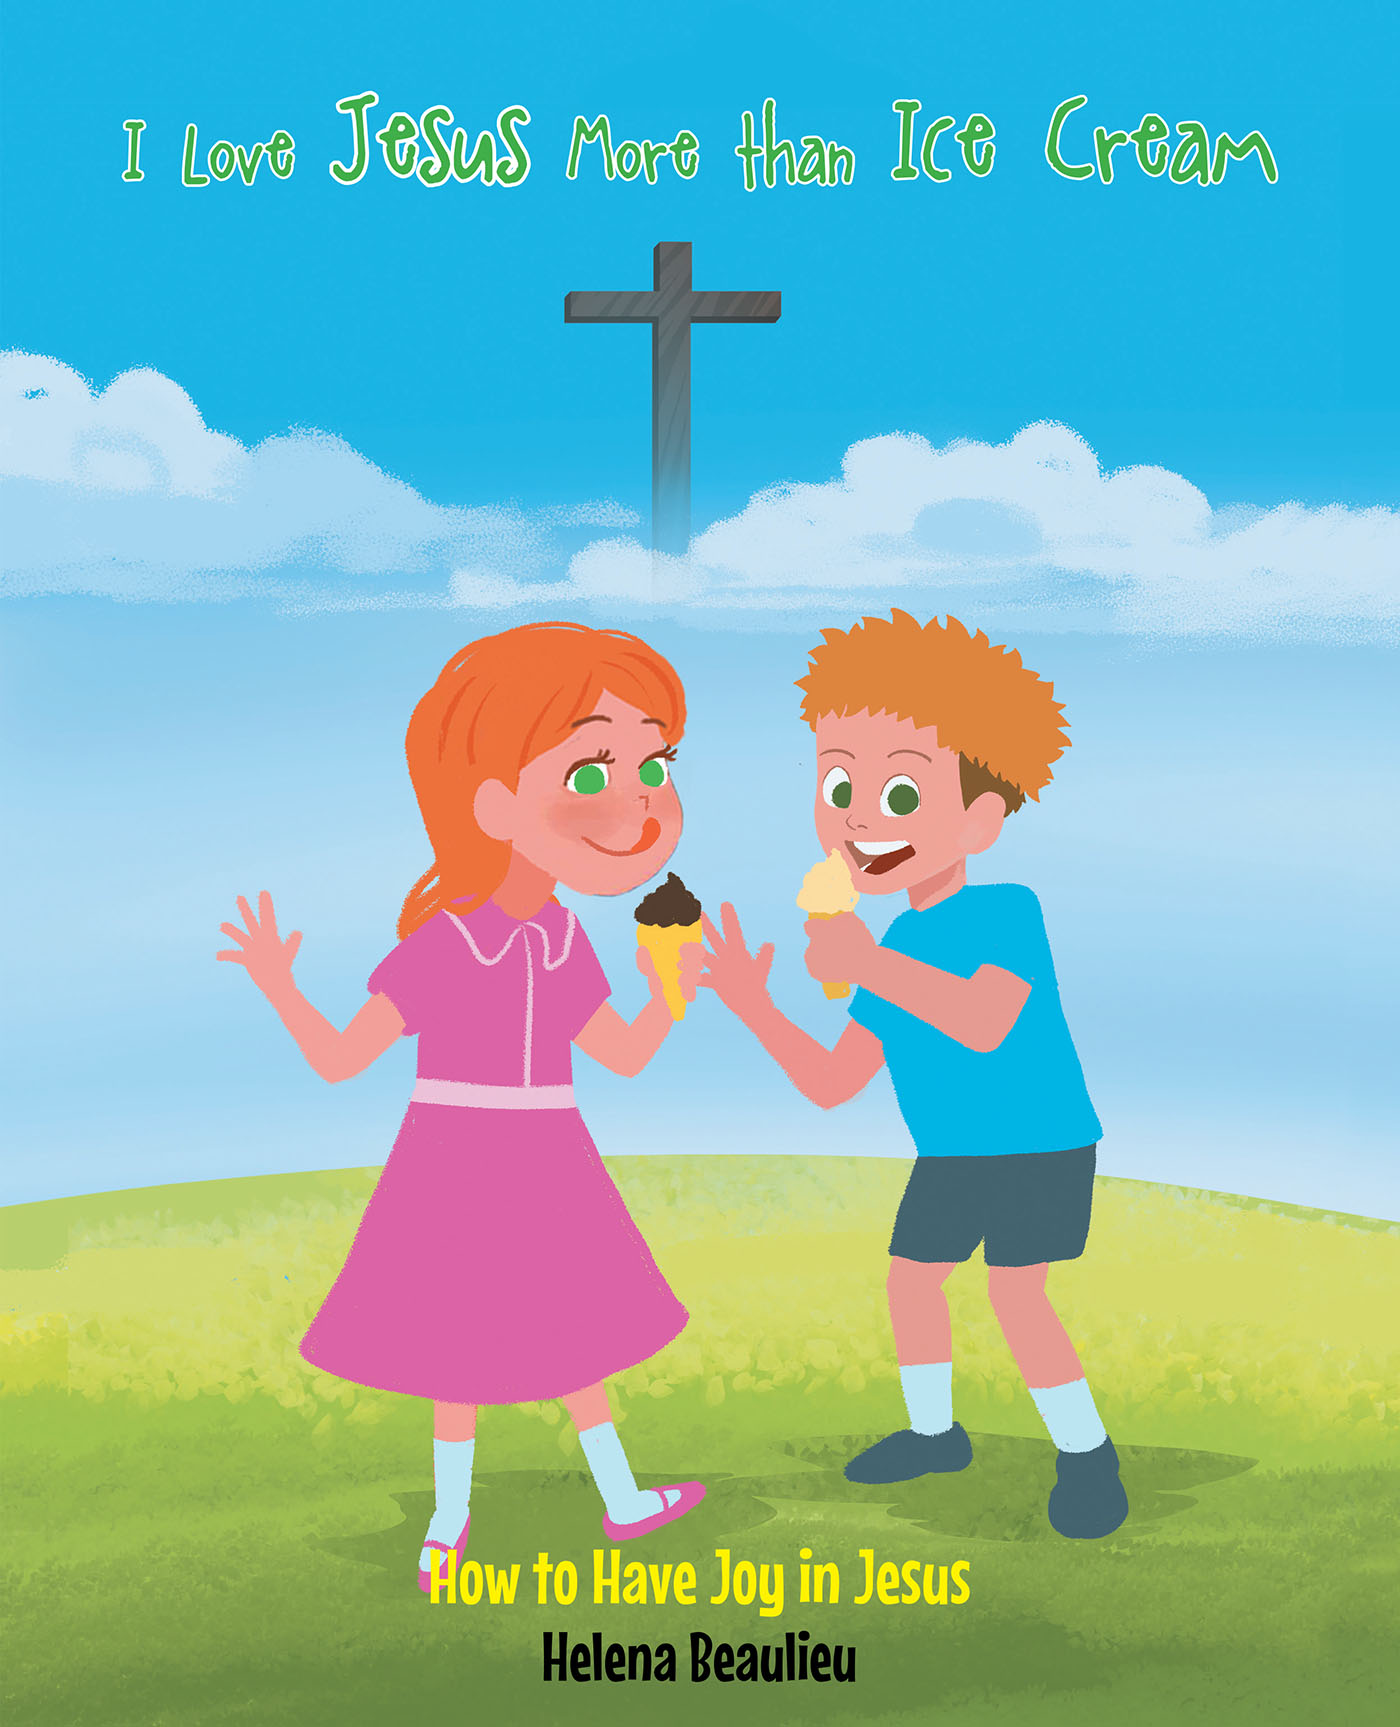 Helena Beaulieu’s Newly Released "I Love Jesus More Than Ice Cream: How to Have Joy in Jesus" is a Charming Celebration of God’s Gifts to Us All